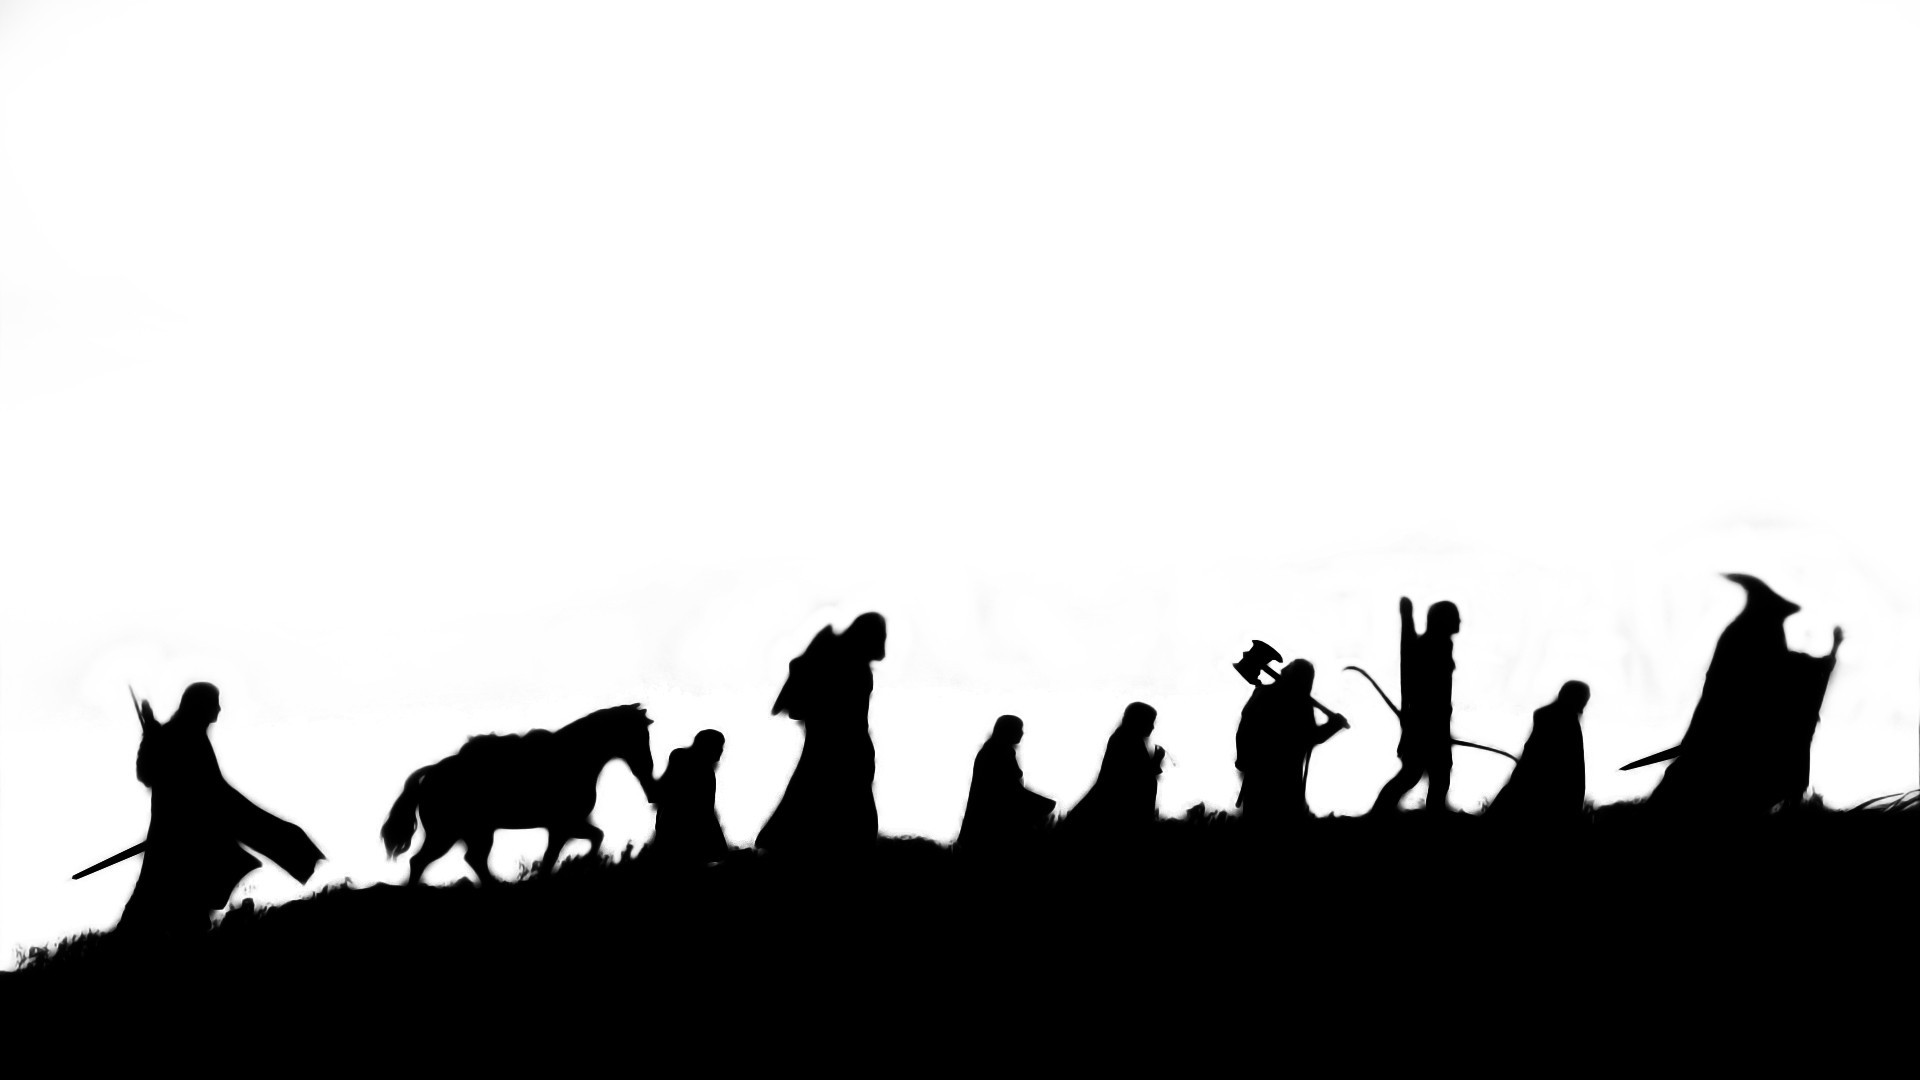 Movies Minimalism The Lord Of The Rings The Fellowship Of The Ring 1920x1080